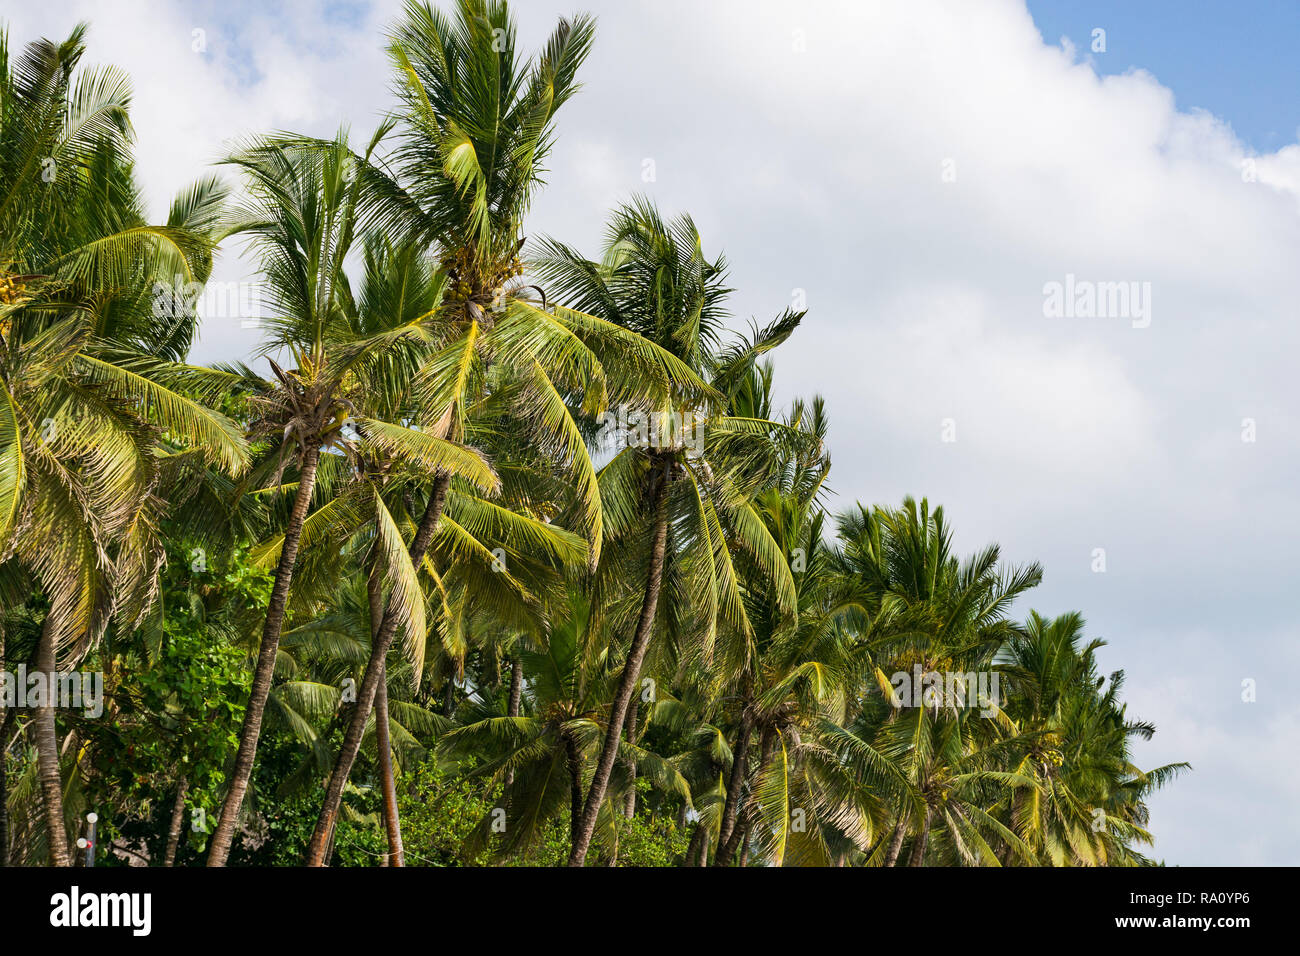 Coconut palm trees ( Arecaceae or Cocos nucifera ) in early morning light against a blue sky with light white clouds Stock Photo